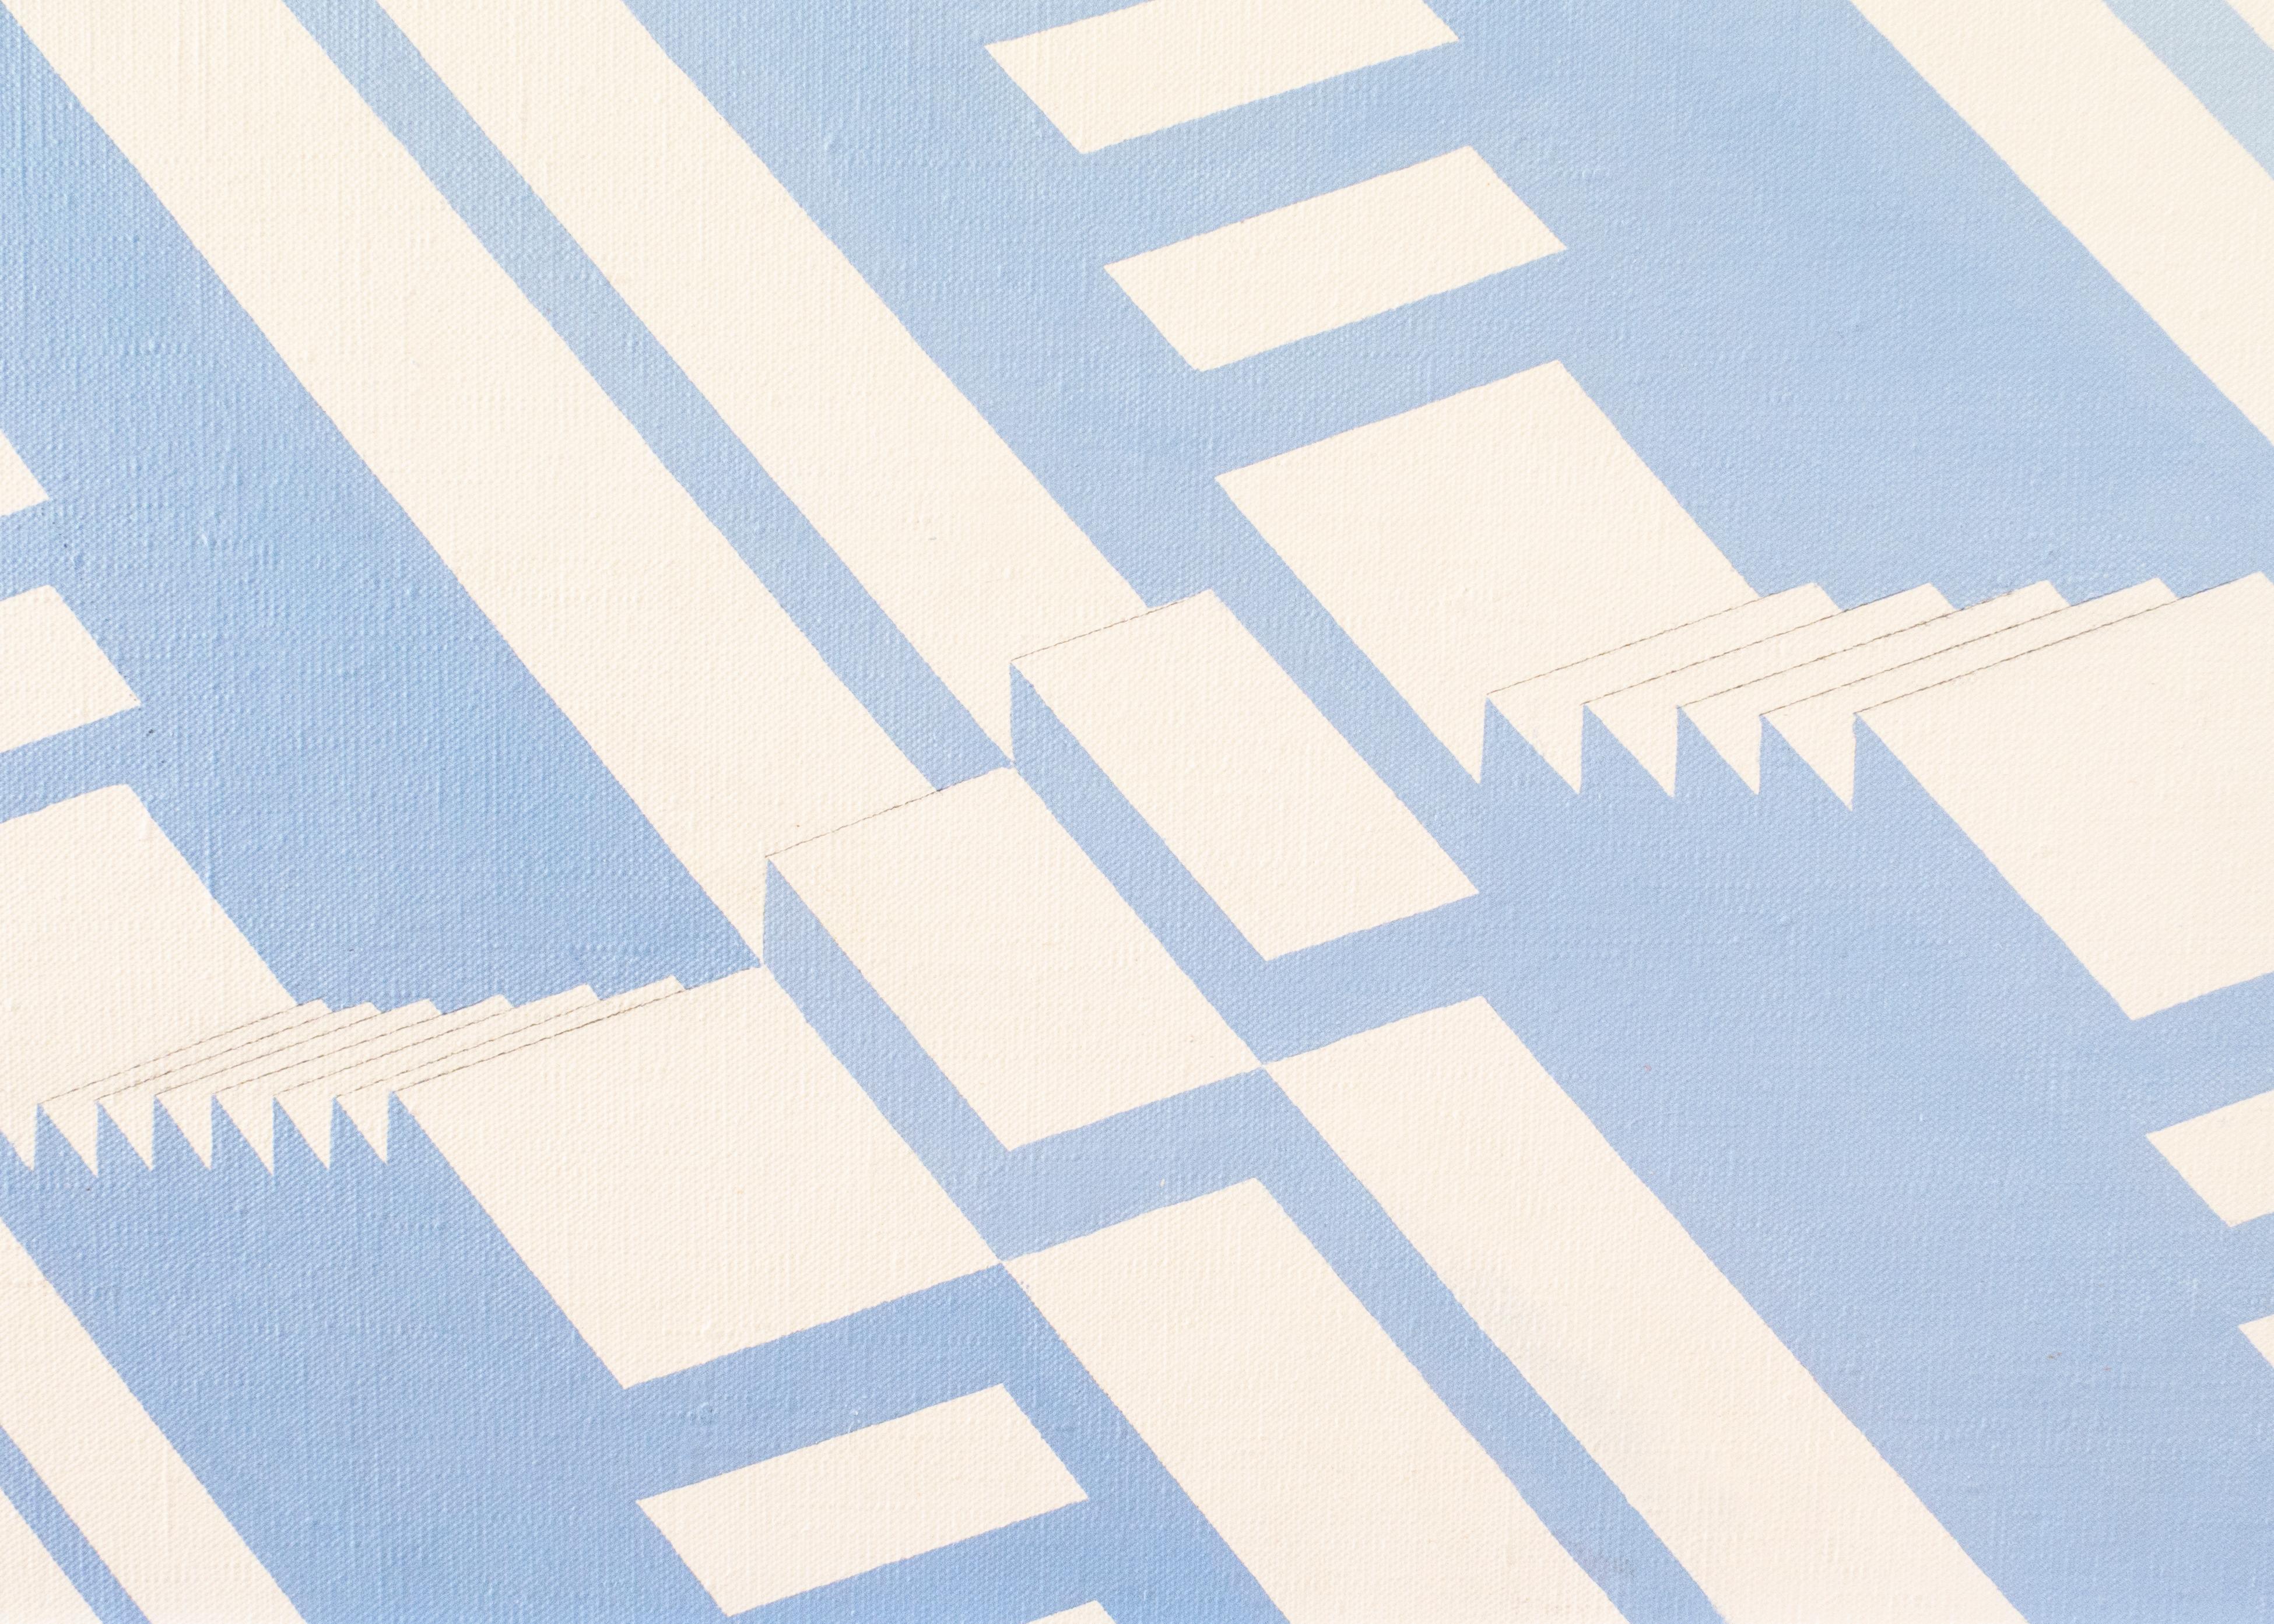 Oil on canvas within a white painted wood frame. Depicting stairs in against a graduated blue ground. Signed and dated on front: CM 73 and on reverse.